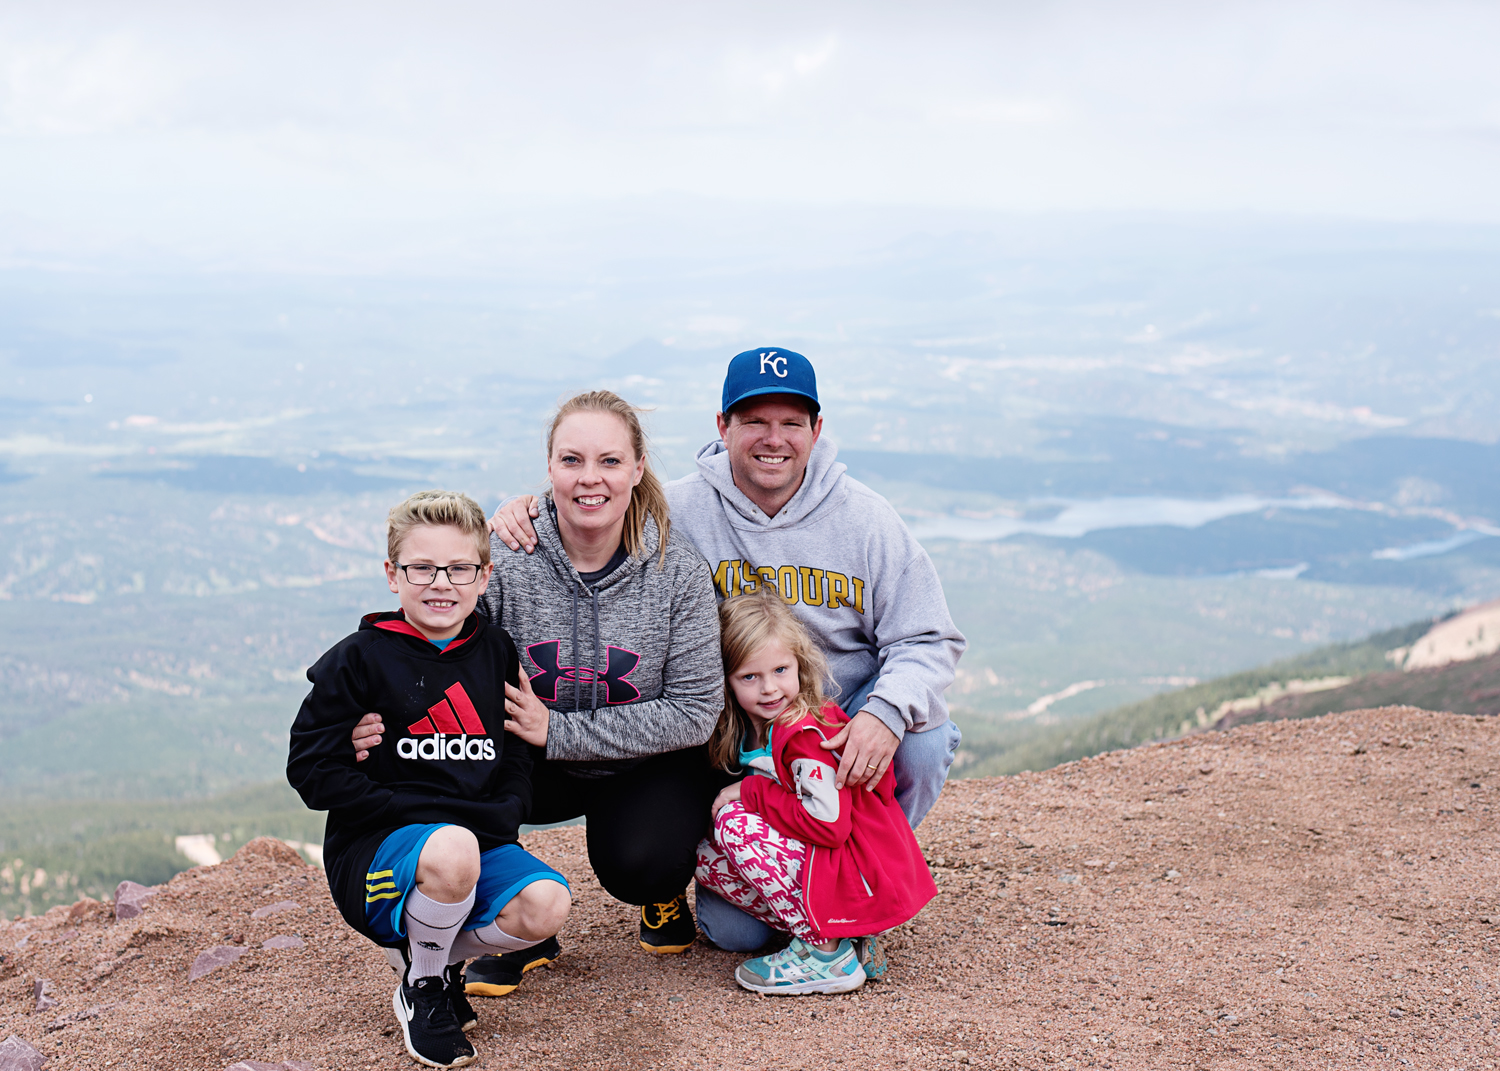 Tips to Help Prepare You For a Trip to Colorado - Altitude Sickness and First Aid